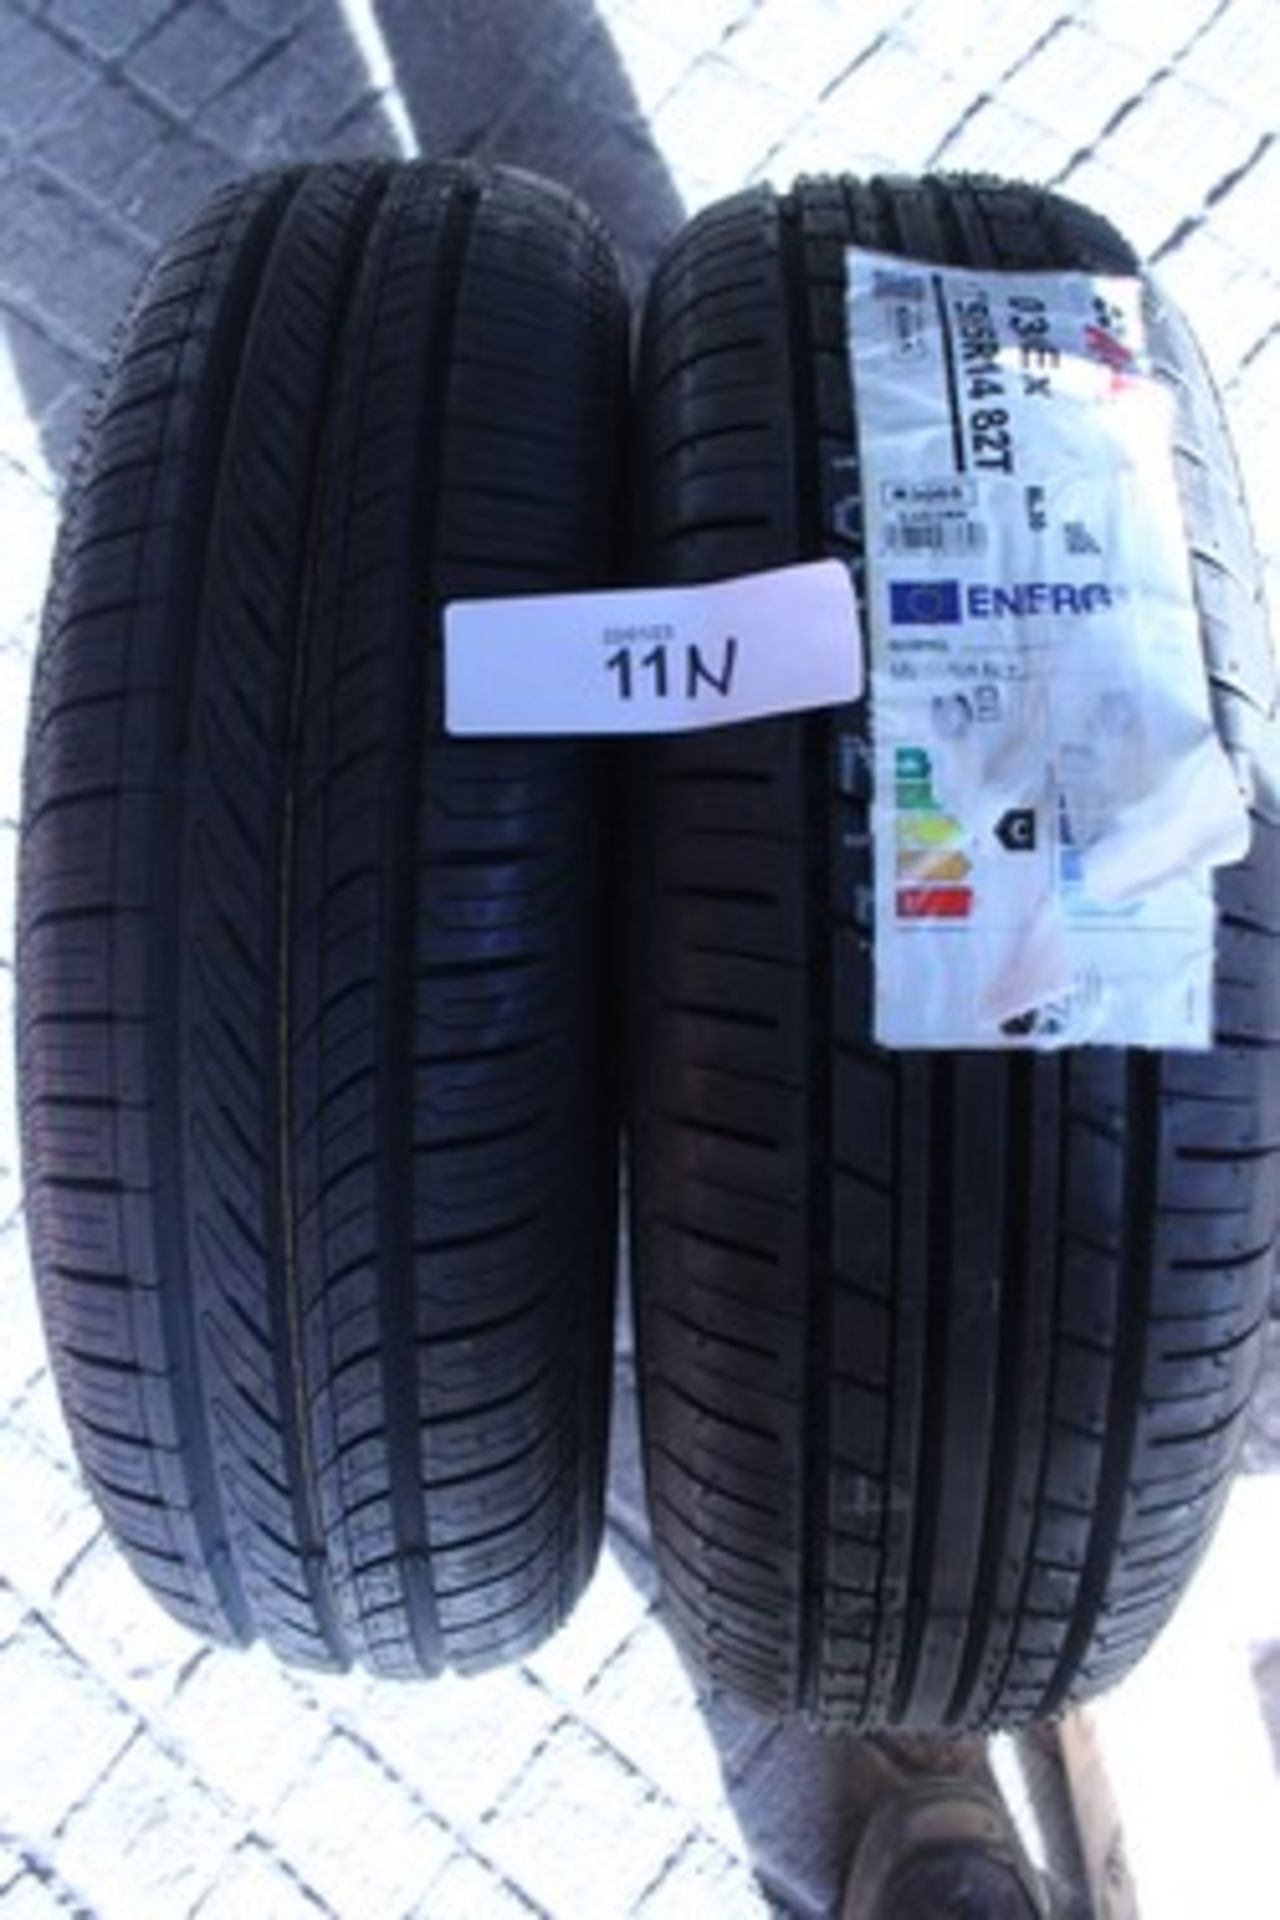 1 x Allainace 030EX tyre, size 175/5R14 and 1 x Arrow Speed tyre, size 165/70R14 - New (open shed)